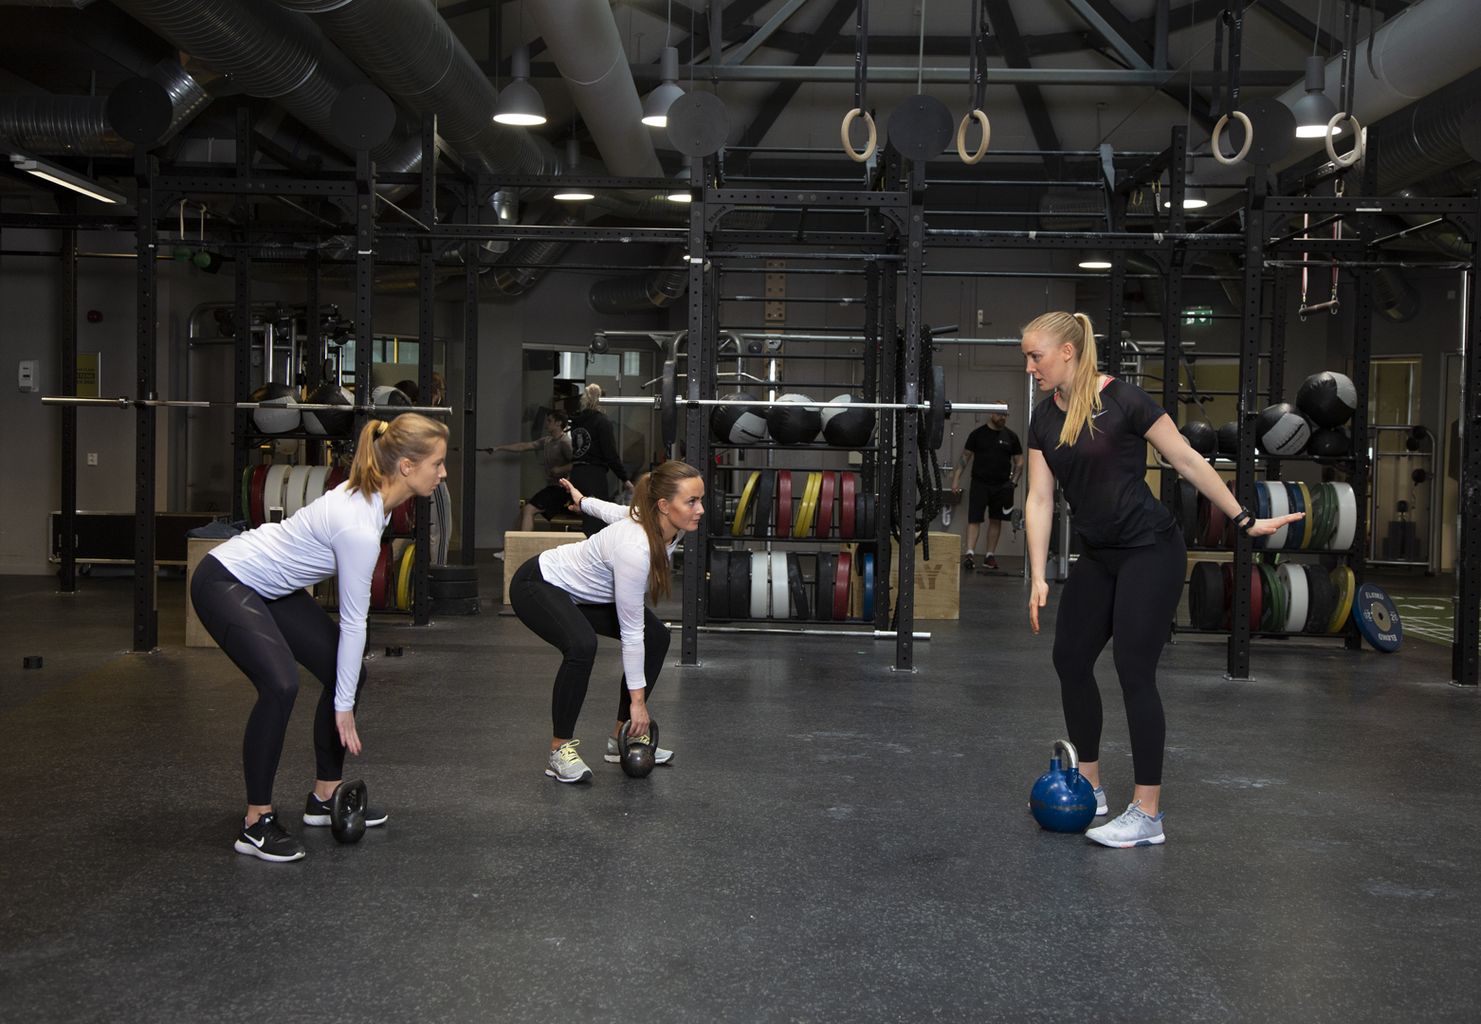 Three women working out together with kettlebells.